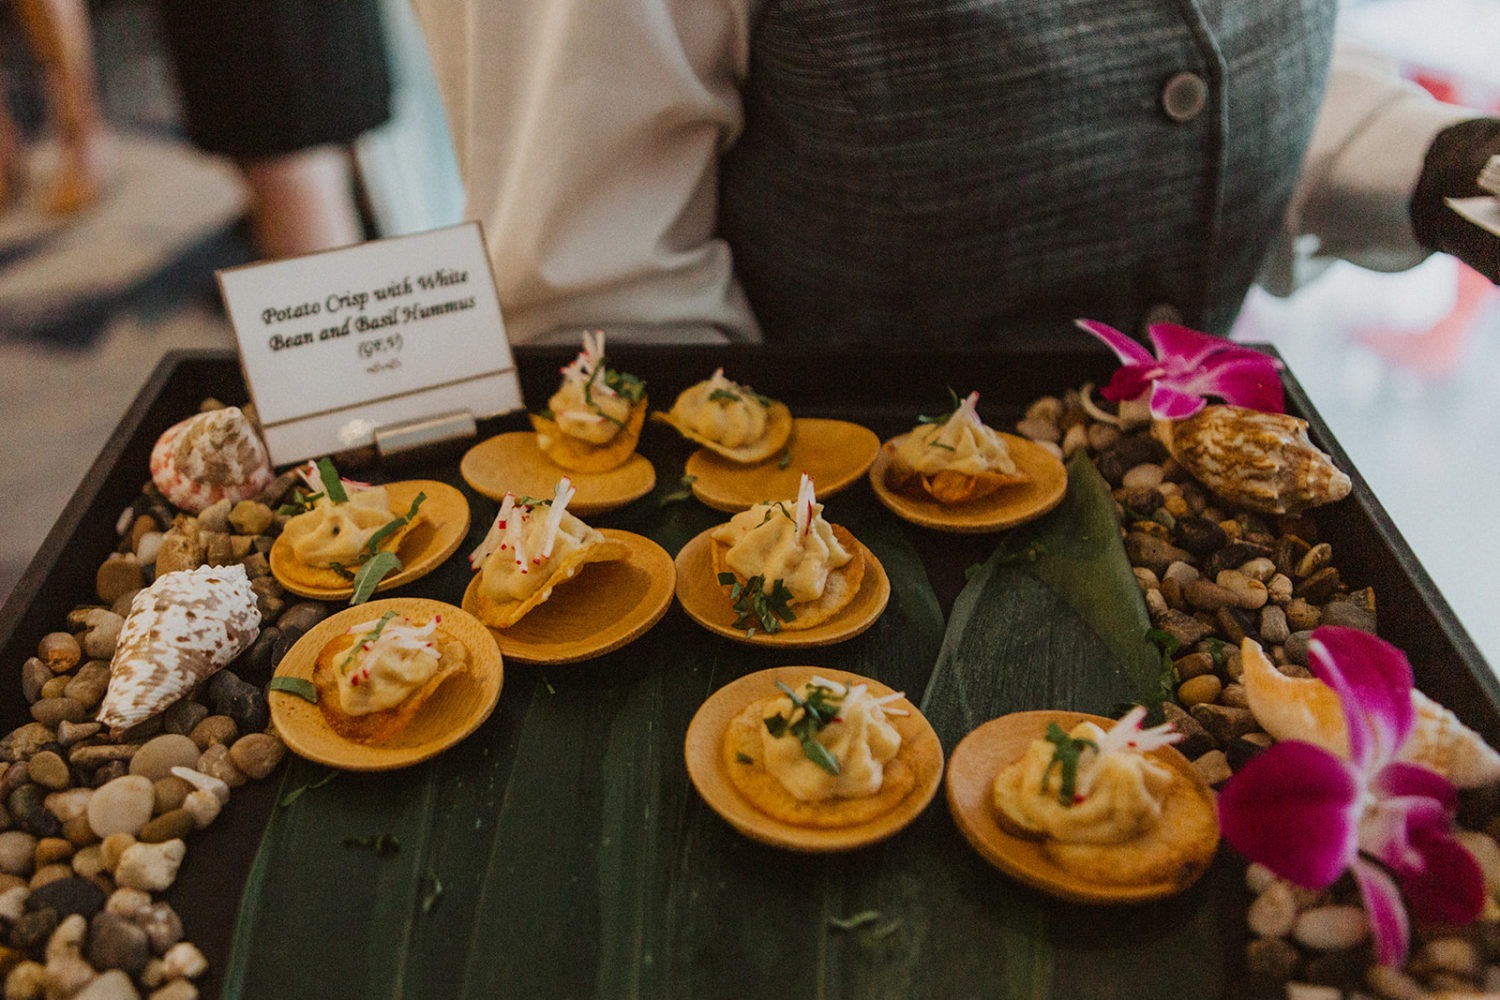 Light bites are served during cocktail hour at one of the best wedding venues in dc